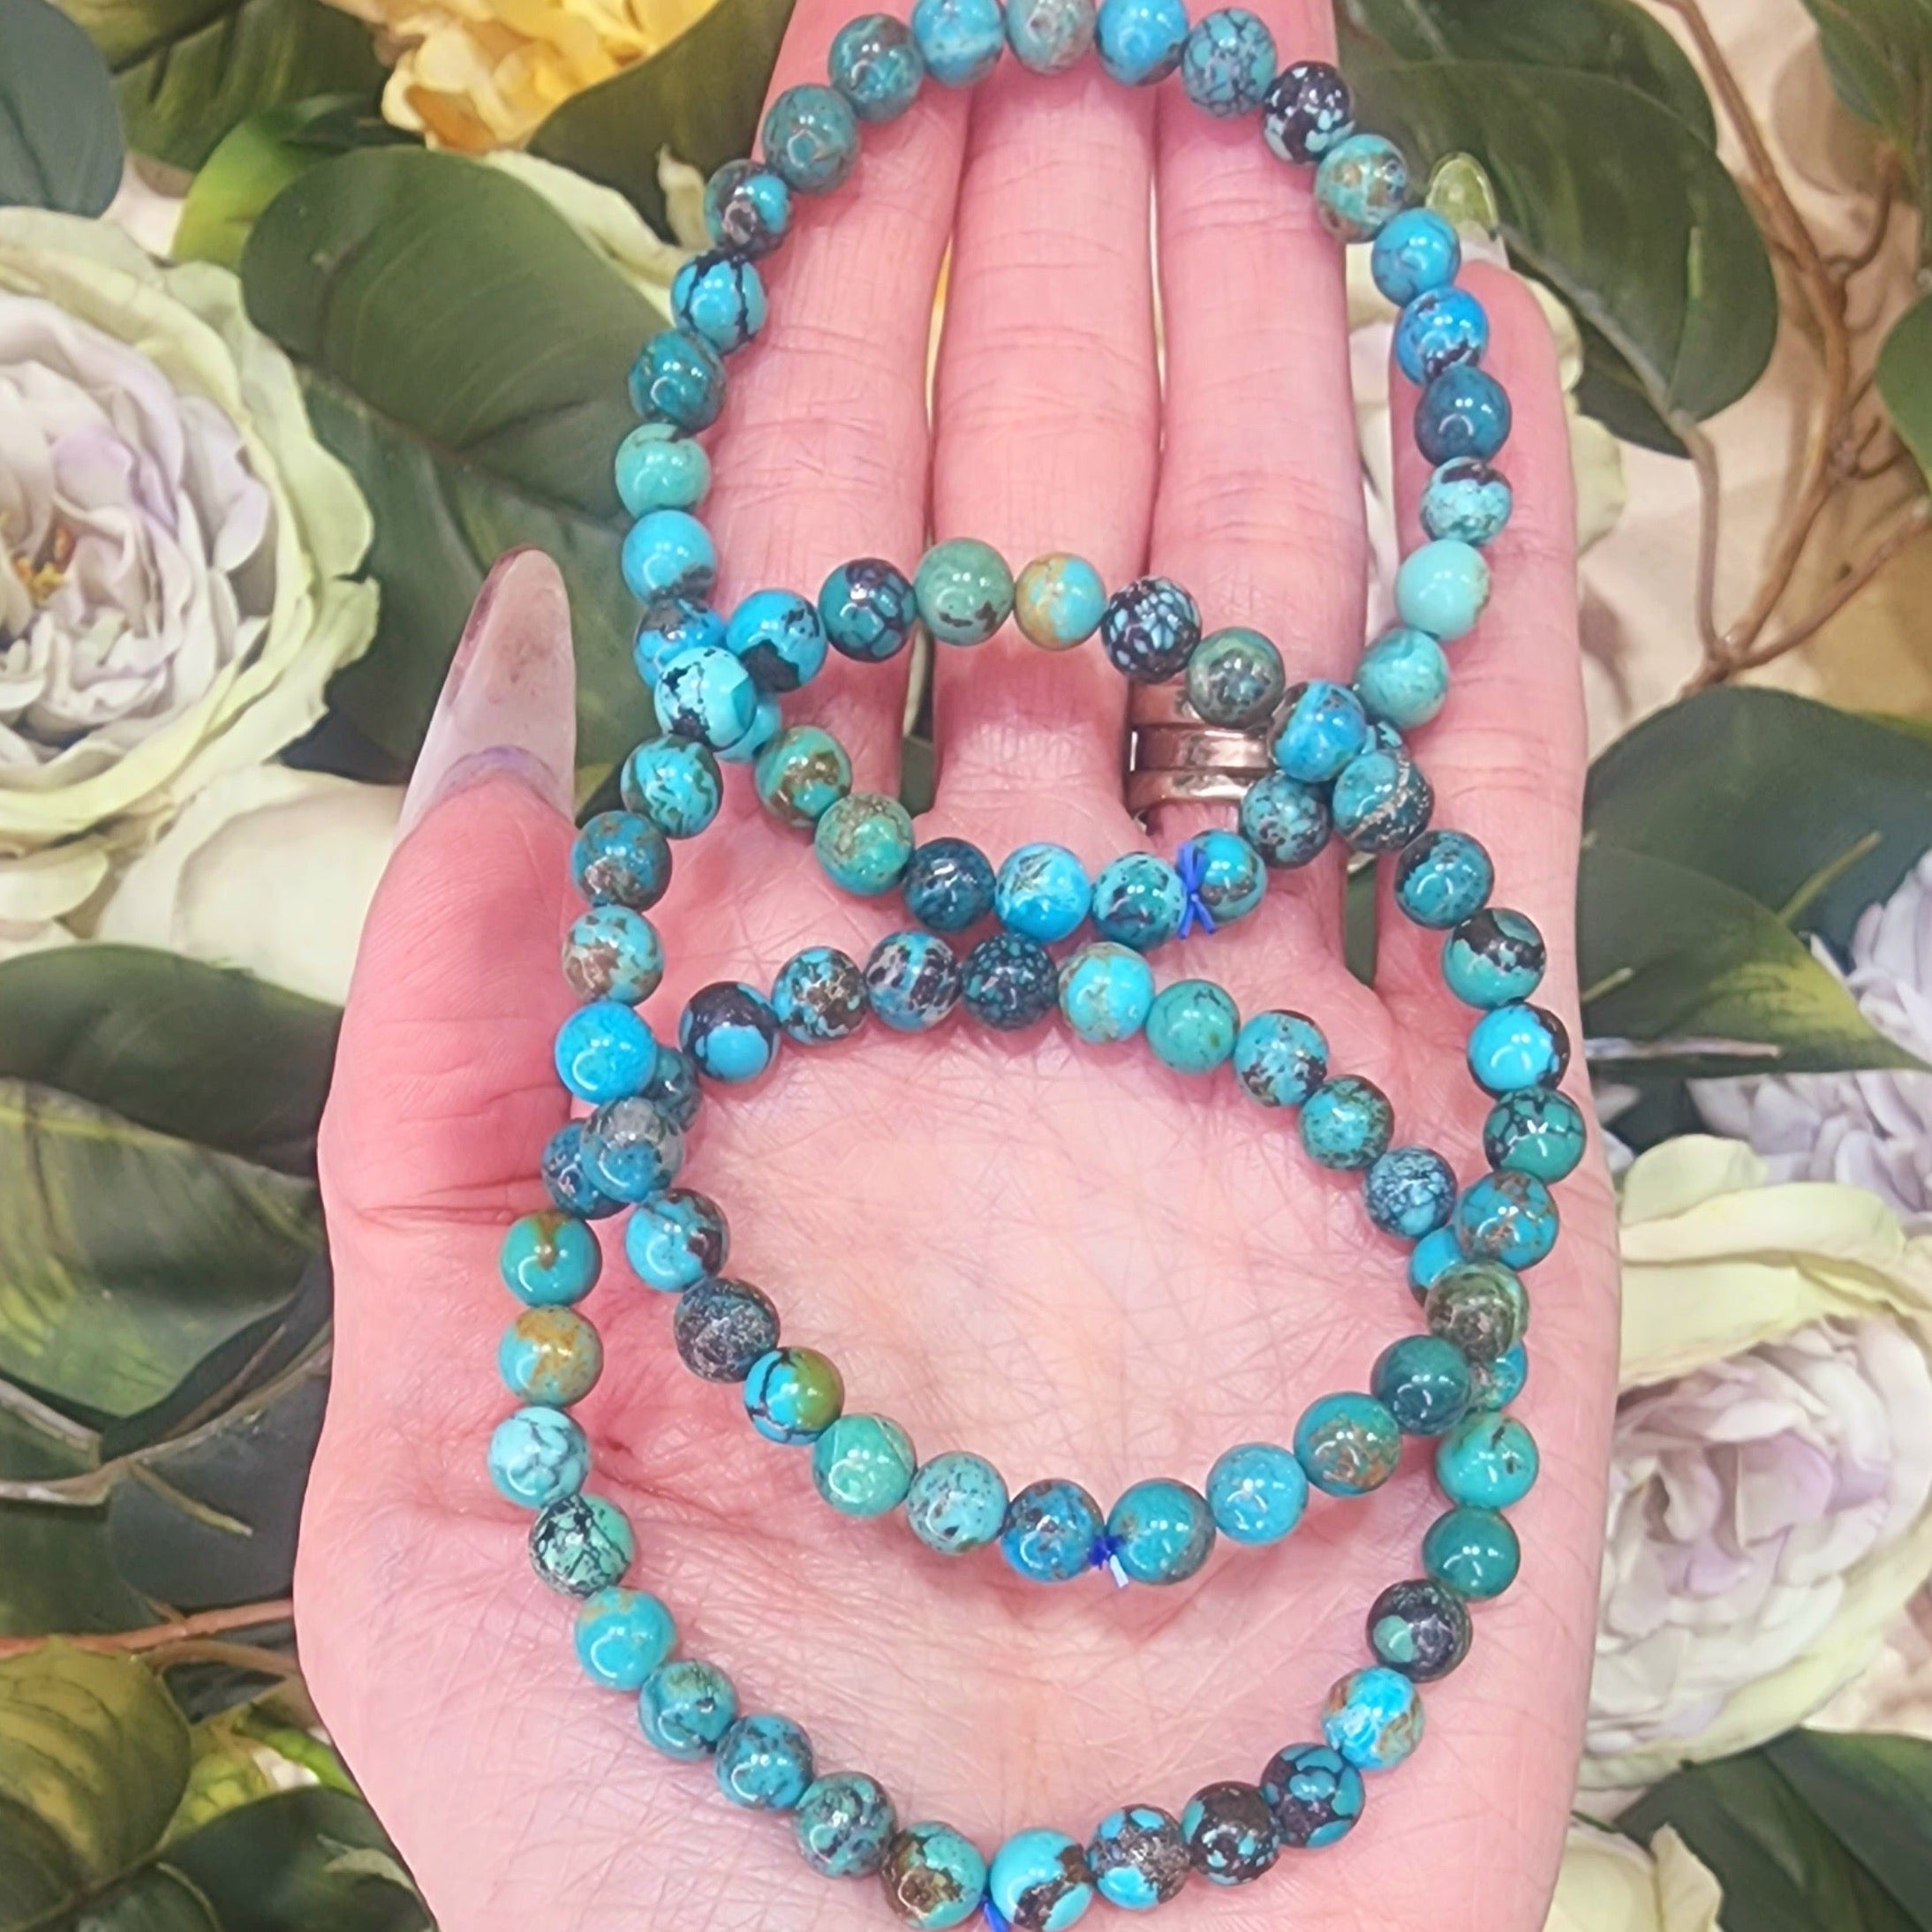 Tibetan Turquoise Bracelet (High Quality) for Good Luck, Love, Prosperity and Protection